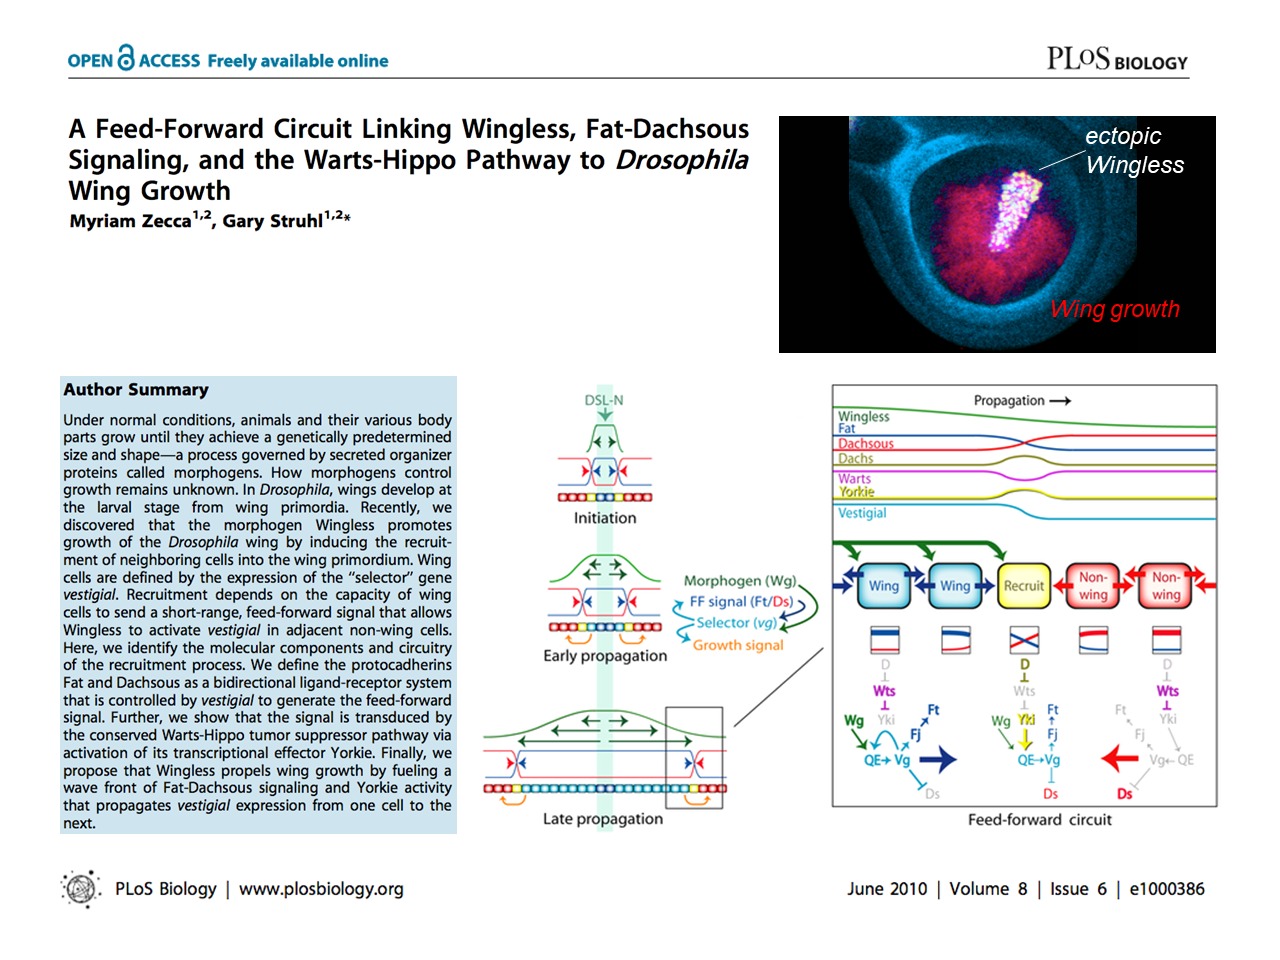 A Feed-Forward Circuit Linking Wingless, Fat-Dachsous Signaling, and the Warts-Hippo Pathway to Drosophila Wing Growth